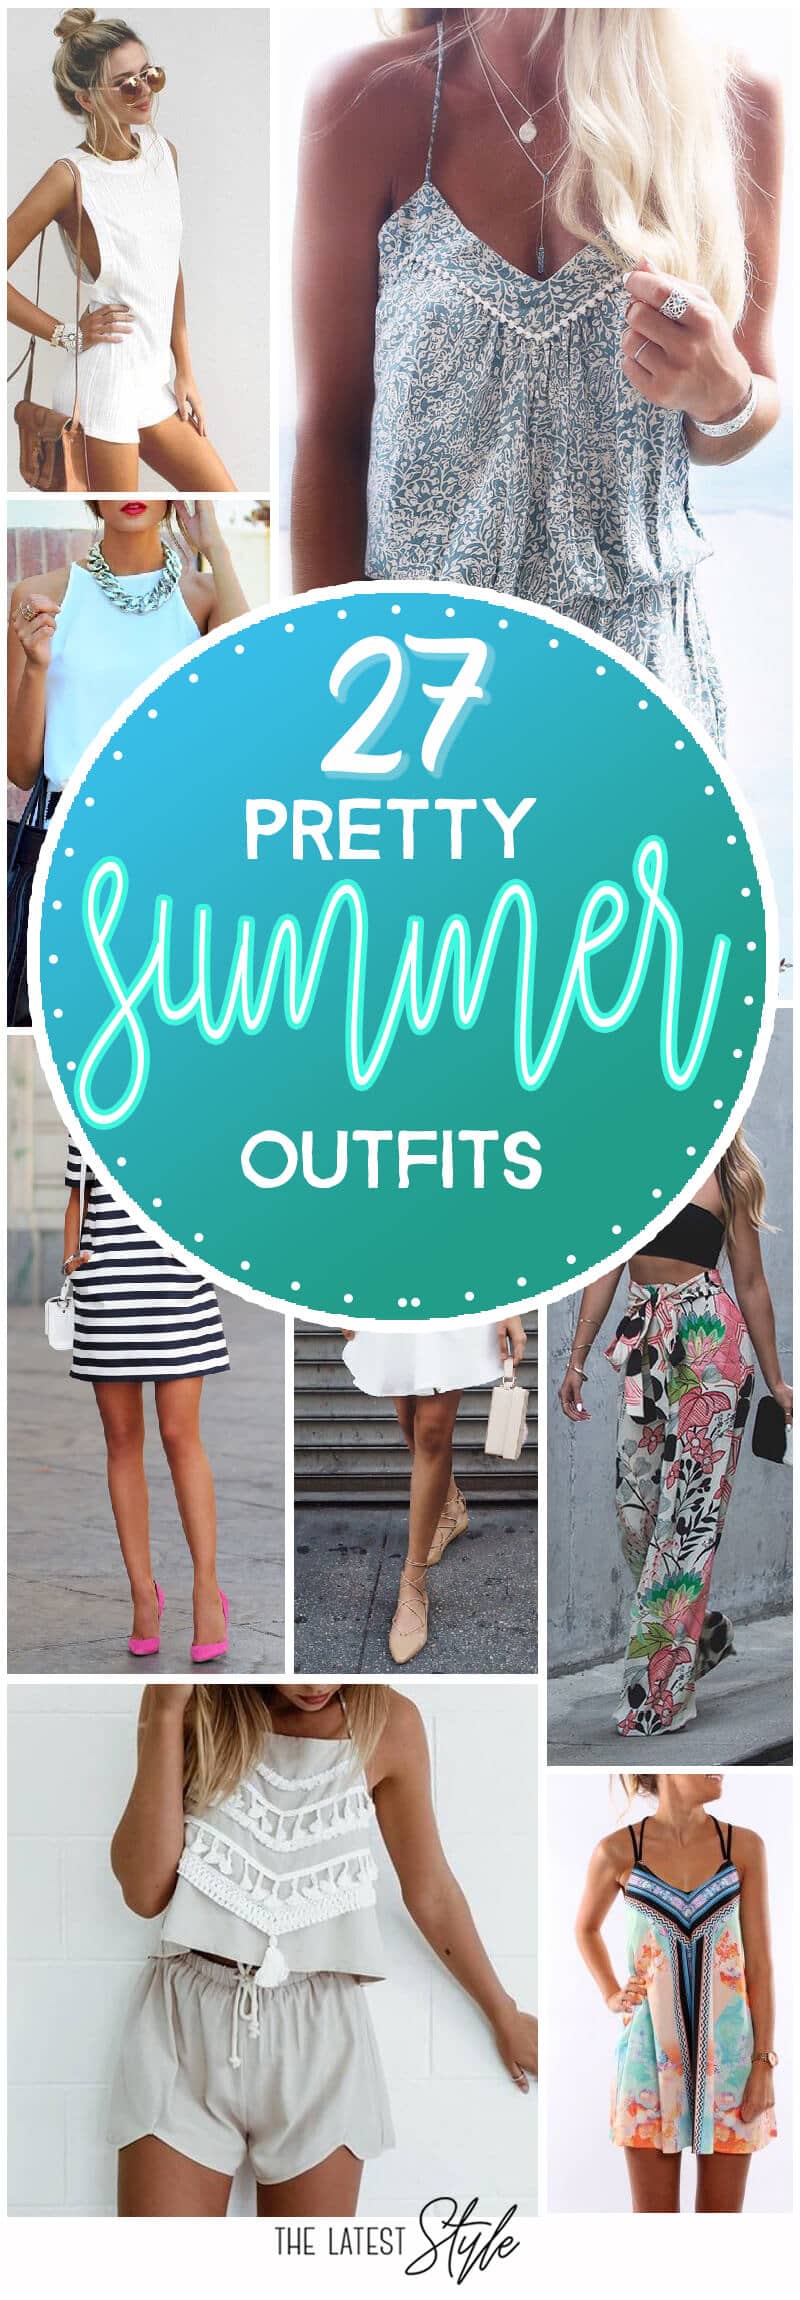 27 Pretty Summer Outfits